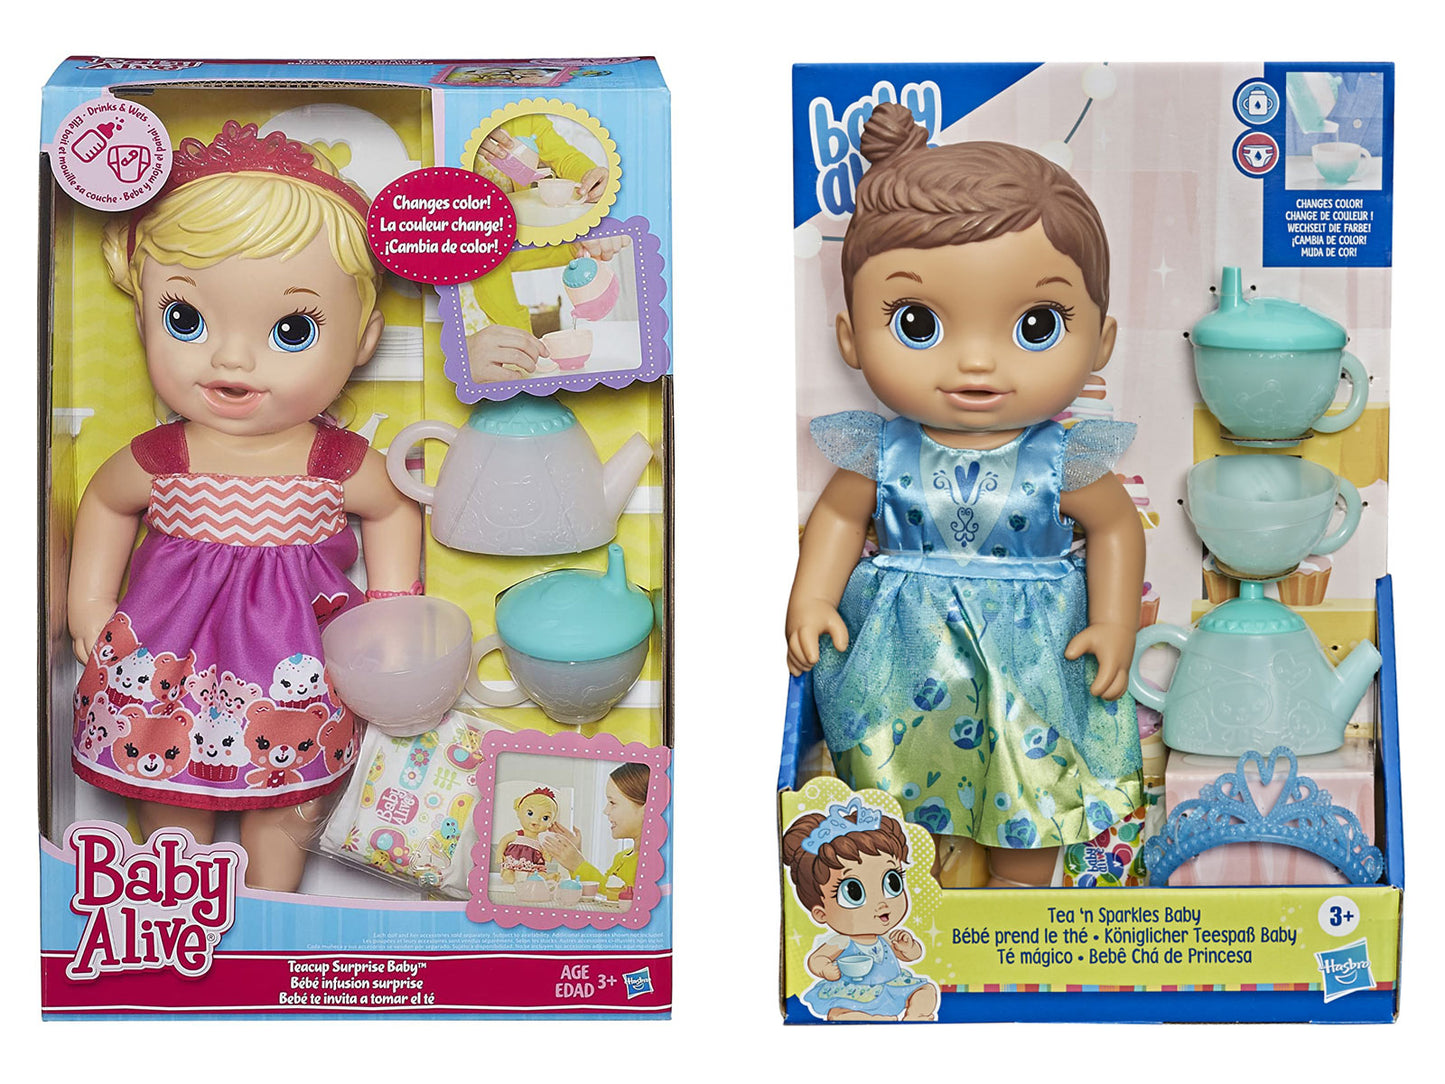 Baby Alive Tea ‘n Sparkles Baby Pretend Play Doll, Color-Changing Tea Set, Doll Accessories, Drinks, Wets (Assortment Styles)